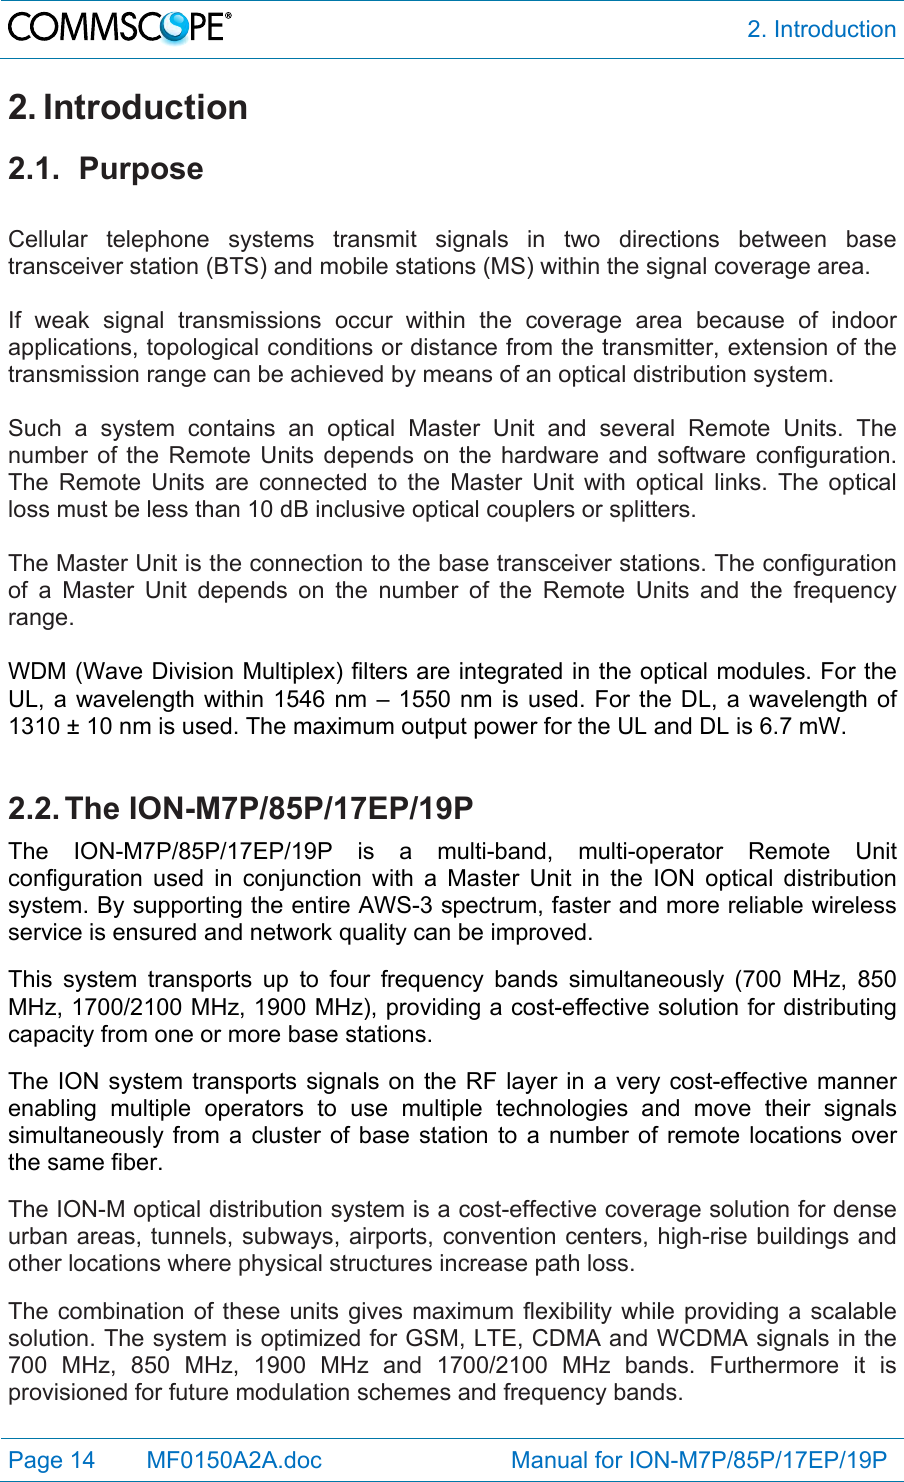  2. Introduction Page 14   MF0150A2A.doc                             Manual for ION-M7P/85P/17EP/19P  2. Introduction 2.1. Purpose  Cellular telephone systems transmit signals in two directions between base transceiver station (BTS) and mobile stations (MS) within the signal coverage area.  If weak signal transmissions occur within the coverage area because of indoor applications, topological conditions or distance from the transmitter, extension of the transmission range can be achieved by means of an optical distribution system.  Such a system contains an optical Master Unit and several Remote Units. The number of the Remote Units depends on the hardware and software configuration. The Remote Units are connected to the Master Unit with optical links. The optical loss must be less than 10 dB inclusive optical couplers or splitters.  The Master Unit is the connection to the base transceiver stations. The configuration of a Master Unit depends on the number of the Remote Units and the frequency range.   WDM (Wave Division Multiplex) filters are integrated in the optical modules. For the UL, a wavelength within 1546 nm – 1550 nm is used. For the DL, a wavelength of 1310 ± 10 nm is used. The maximum output power for the UL and DL is 6.7 mW.  2.2. The  ION-M7P/85P/17EP/19P The ION-M7P/85P/17EP/19P is a multi-band, multi-operator Remote Unit configuration used in conjunction with a Master Unit in the ION optical distribution system. By supporting the entire AWS-3 spectrum, faster and more reliable wireless service is ensured and network quality can be improved.  This system transports up to four frequency bands simultaneously (700 MHz, 850 MHz, 1700/2100 MHz, 1900 MHz), providing a cost-effective solution for distributing capacity from one or more base stations.   The ION system transports signals on the RF layer in a very cost-effective manner enabling multiple operators to use multiple technologies and move their signals simultaneously from a cluster of base station to a number of remote locations over the same fiber.  The ION-M optical distribution system is a cost-effective coverage solution for dense urban areas, tunnels, subways, airports, convention centers, high-rise buildings and other locations where physical structures increase path loss.  The combination of these units gives maximum flexibility while providing a scalable solution. The system is optimized for GSM, LTE, CDMA and WCDMA signals in the 700 MHz, 850 MHz, 1900 MHz and 1700/2100 MHz bands. Furthermore it is provisioned for future modulation schemes and frequency bands. 